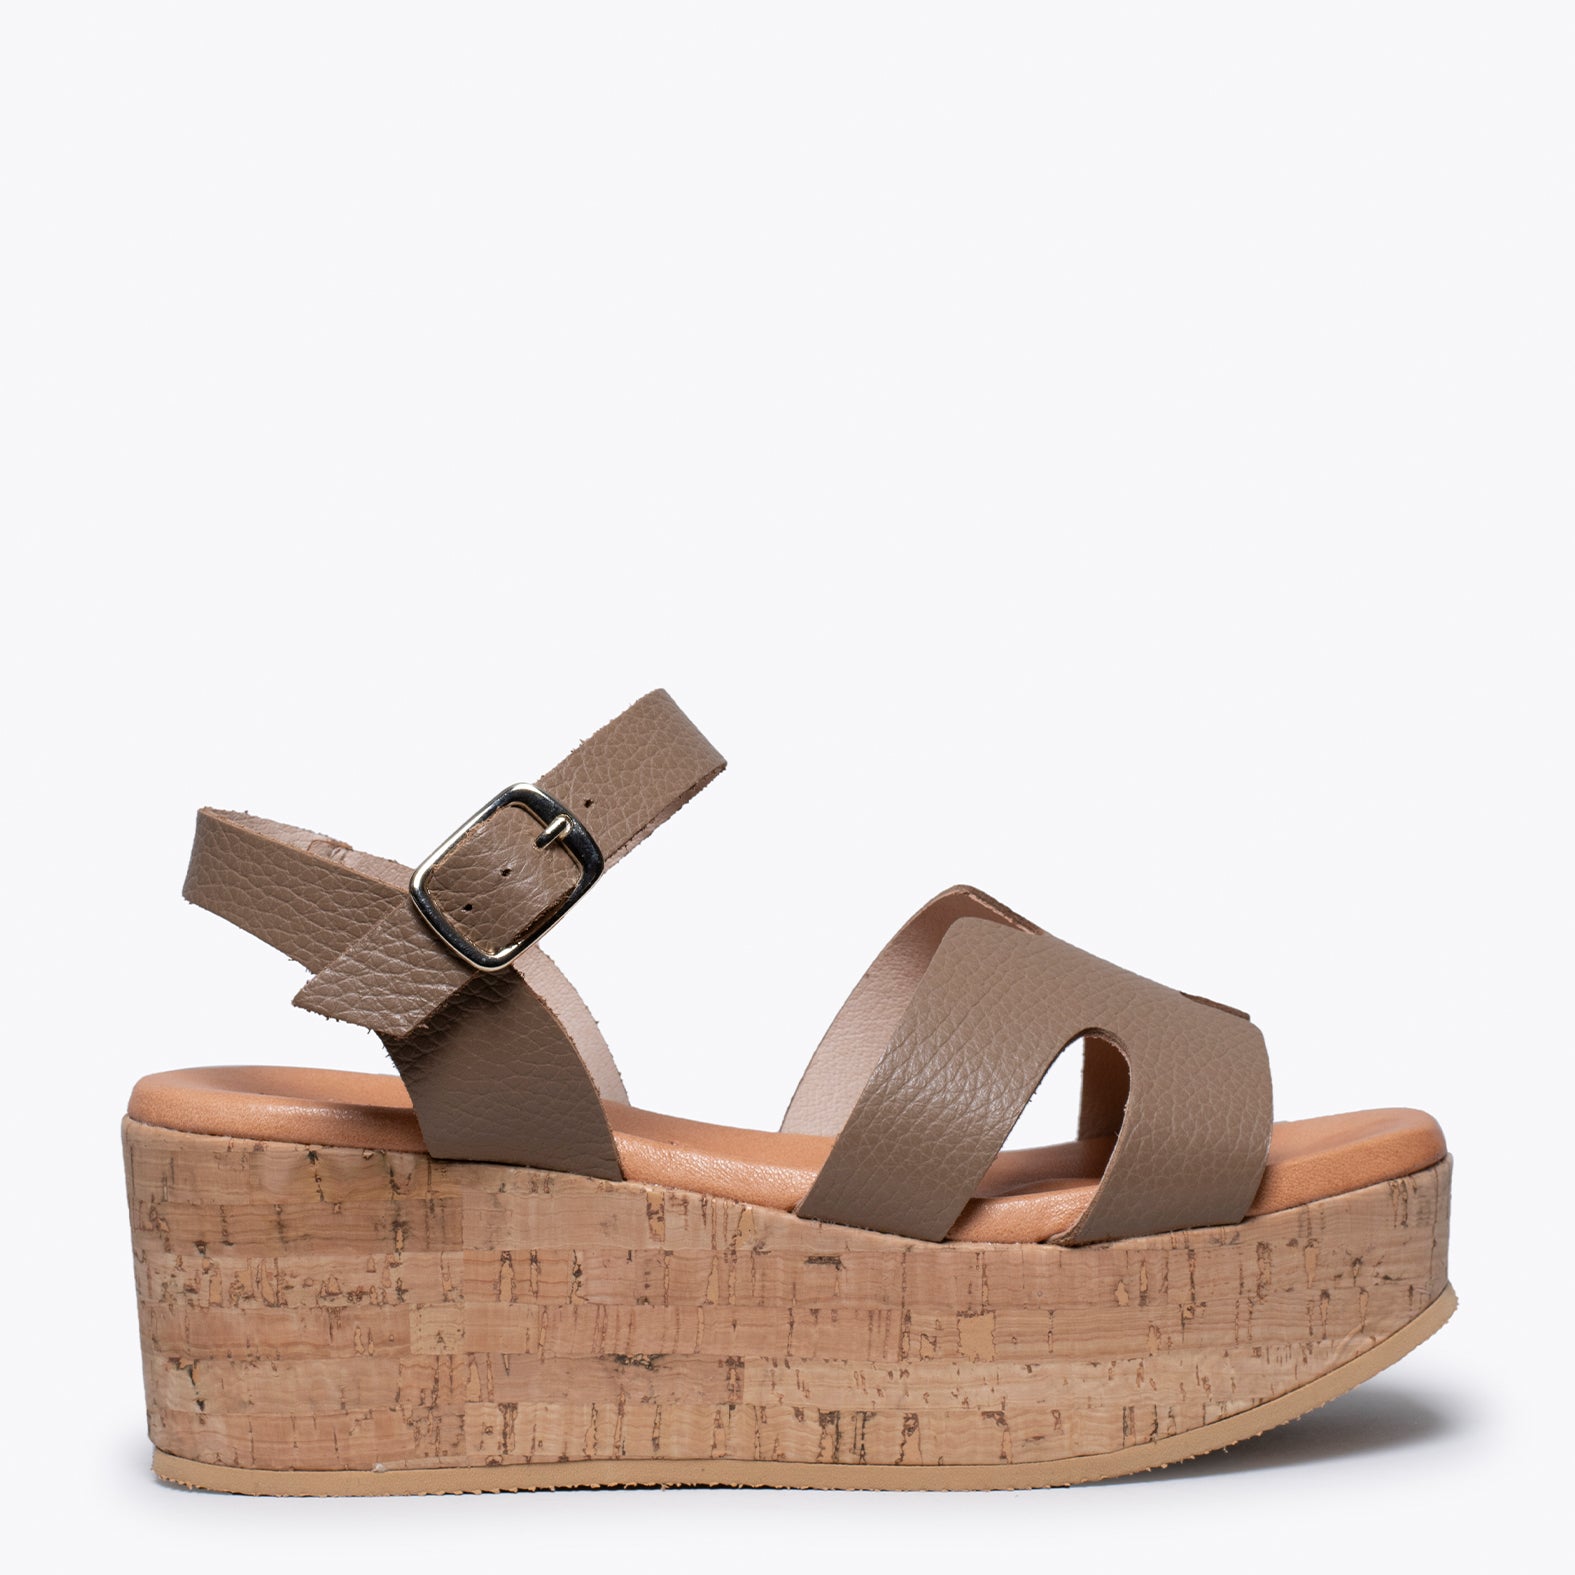 HACHE – TAUPE SANDAL WITH CORK WEDGE